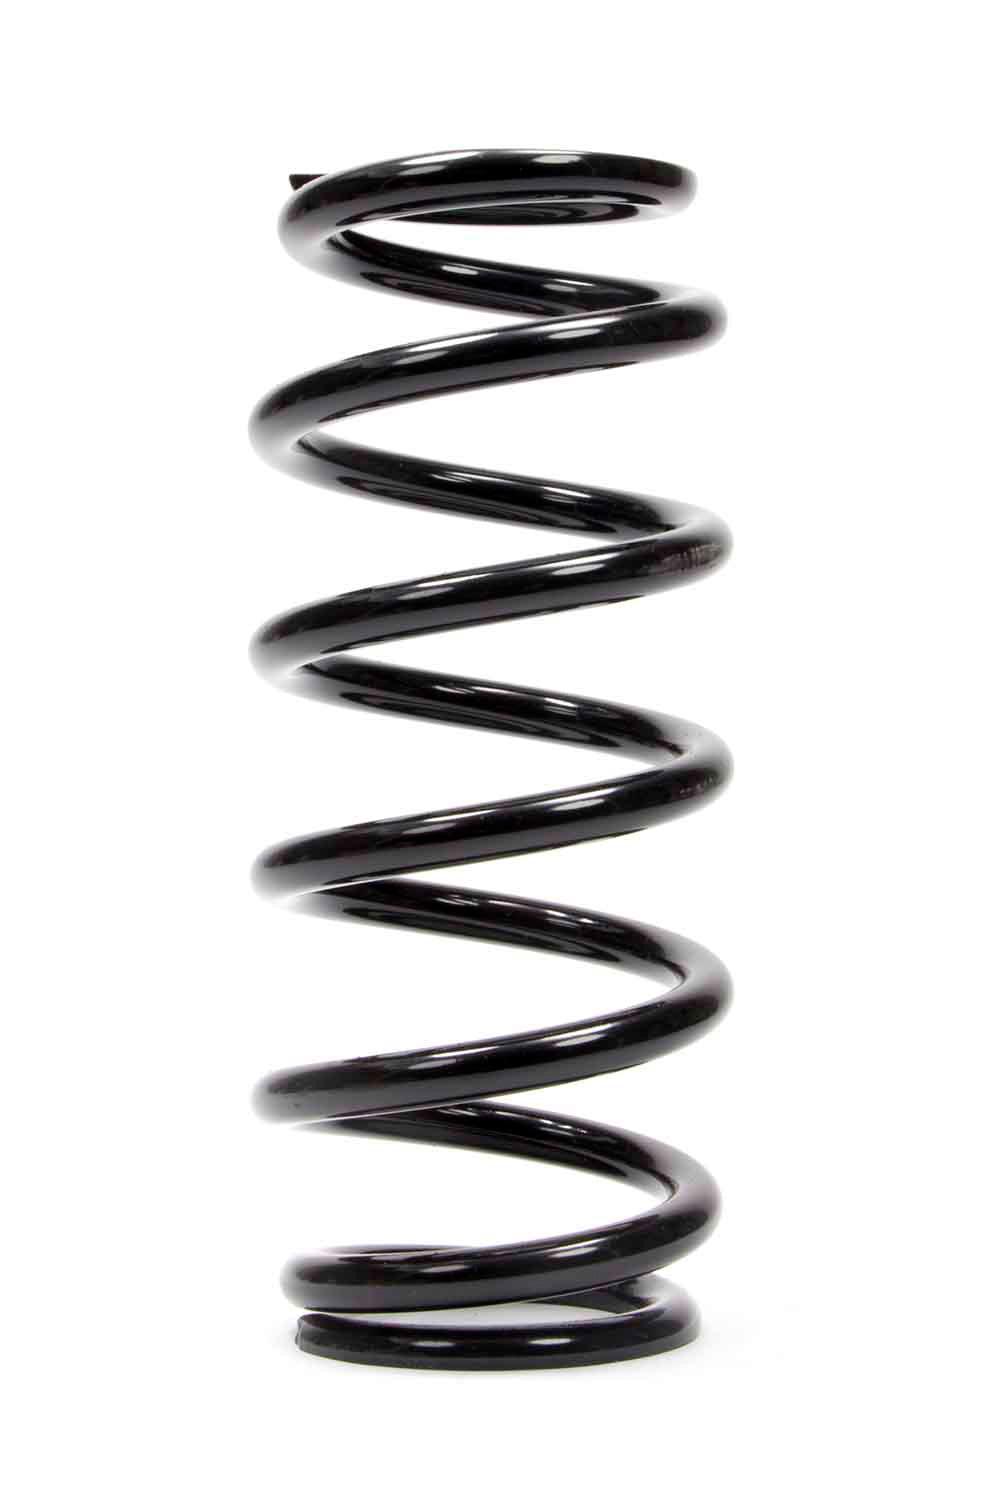 Coil-Over Spring 10in. x 2.625in. x 525lb - Burlile Performance Products